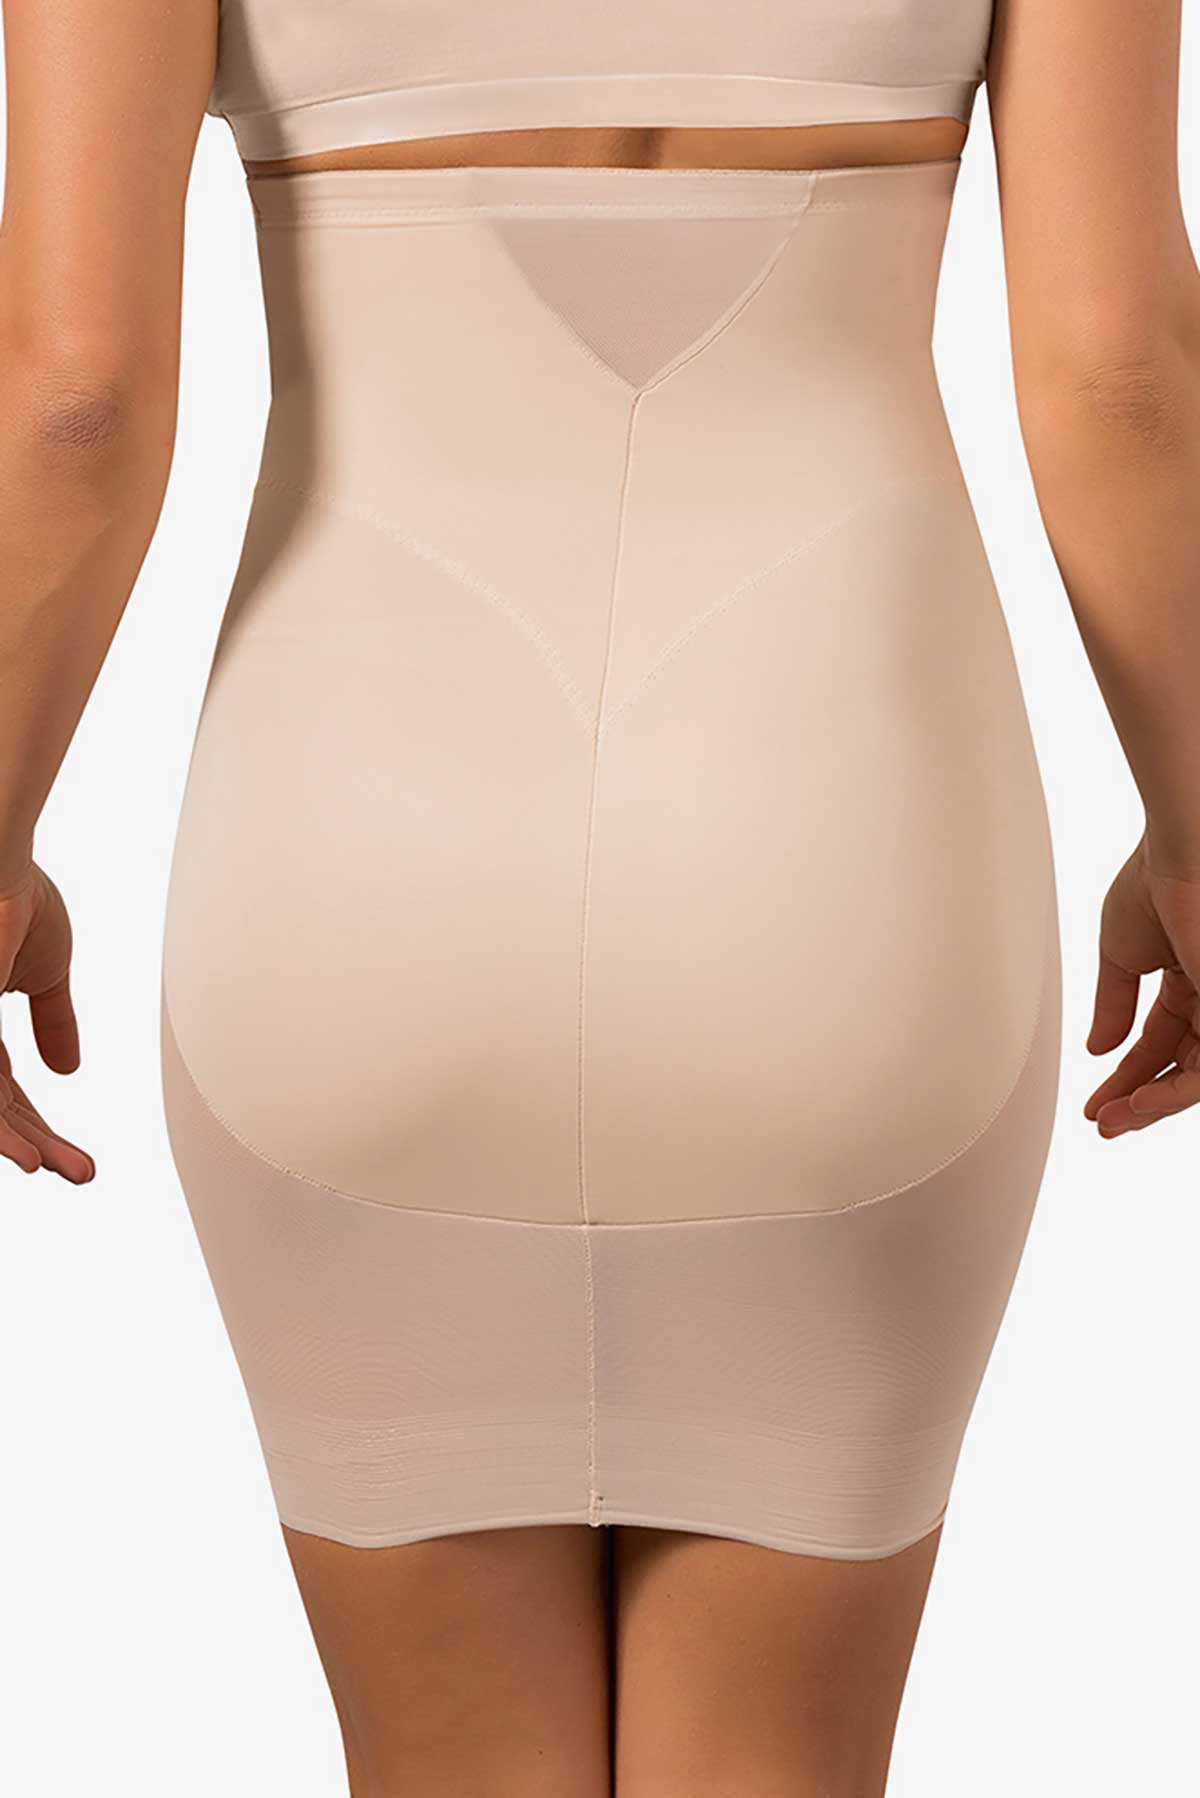 Miraclesuit Women's Shapewear Sexy Sheer Extra Firm Control High-Waist Half  Slip